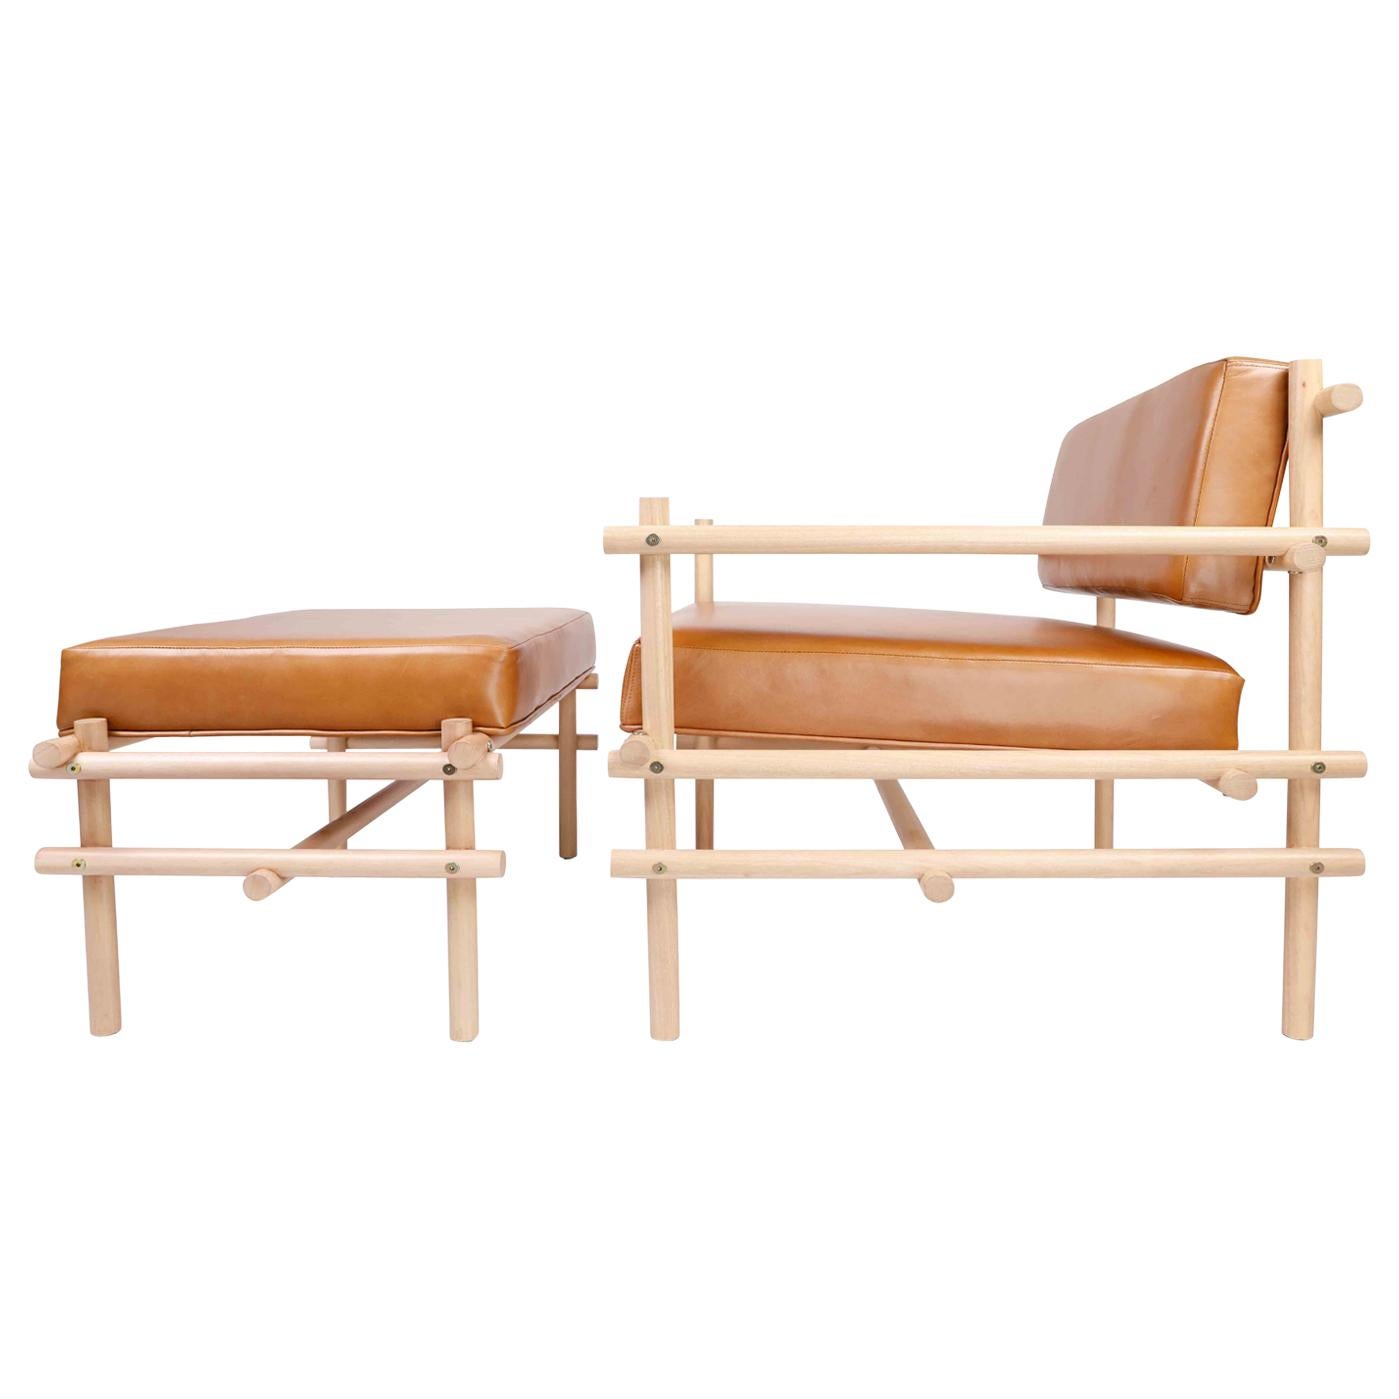 Natural Brazilian Wood Pipa Armchair in Naked Style from Tiago Curioni